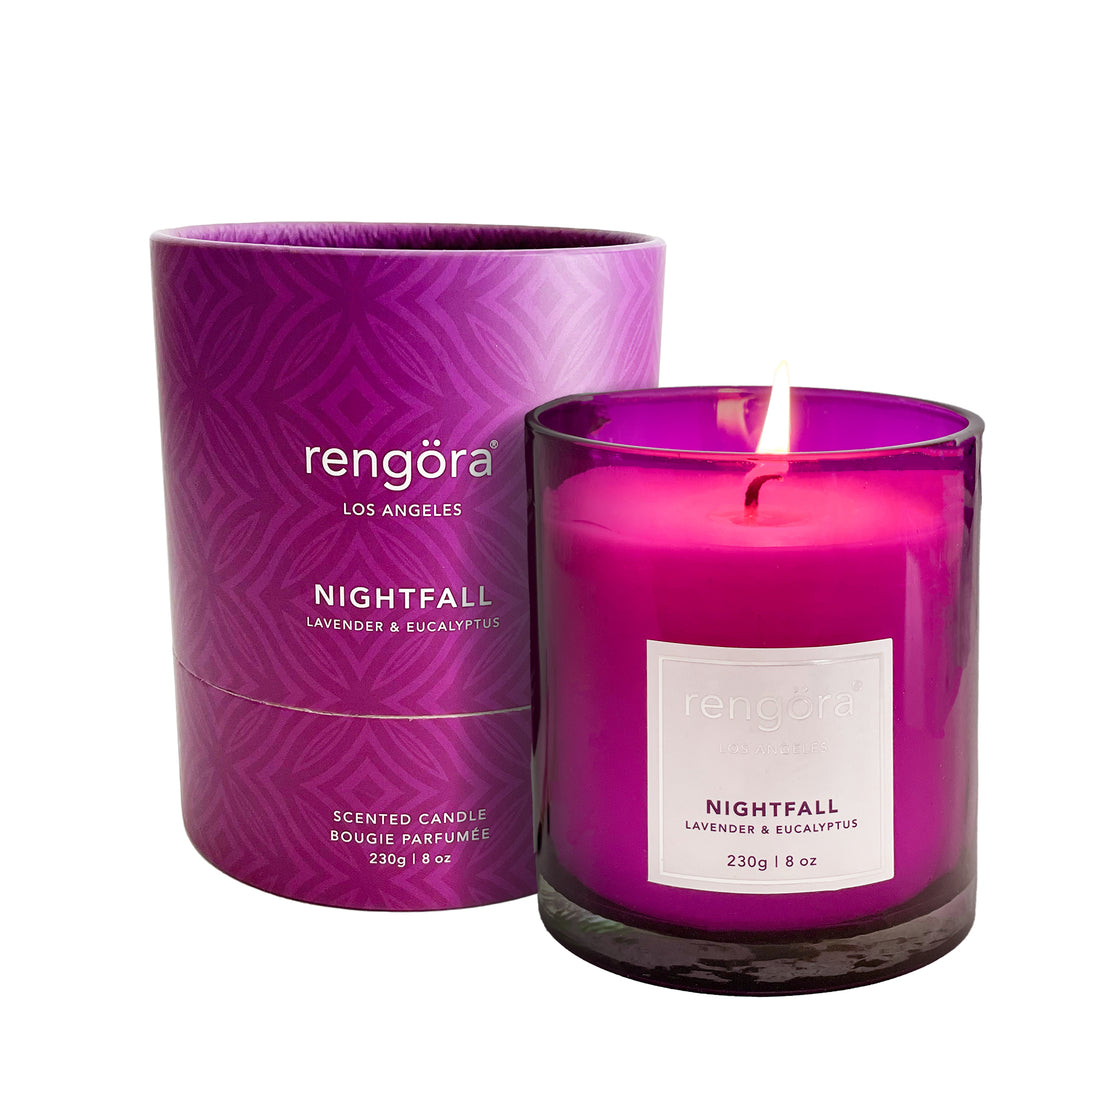 A soy wax candle infused with the soothing scents of lavender and eucalyptus, adorned with real eucalyptus leaves and packaged in a beautiful purple box, showcased against a simple white background